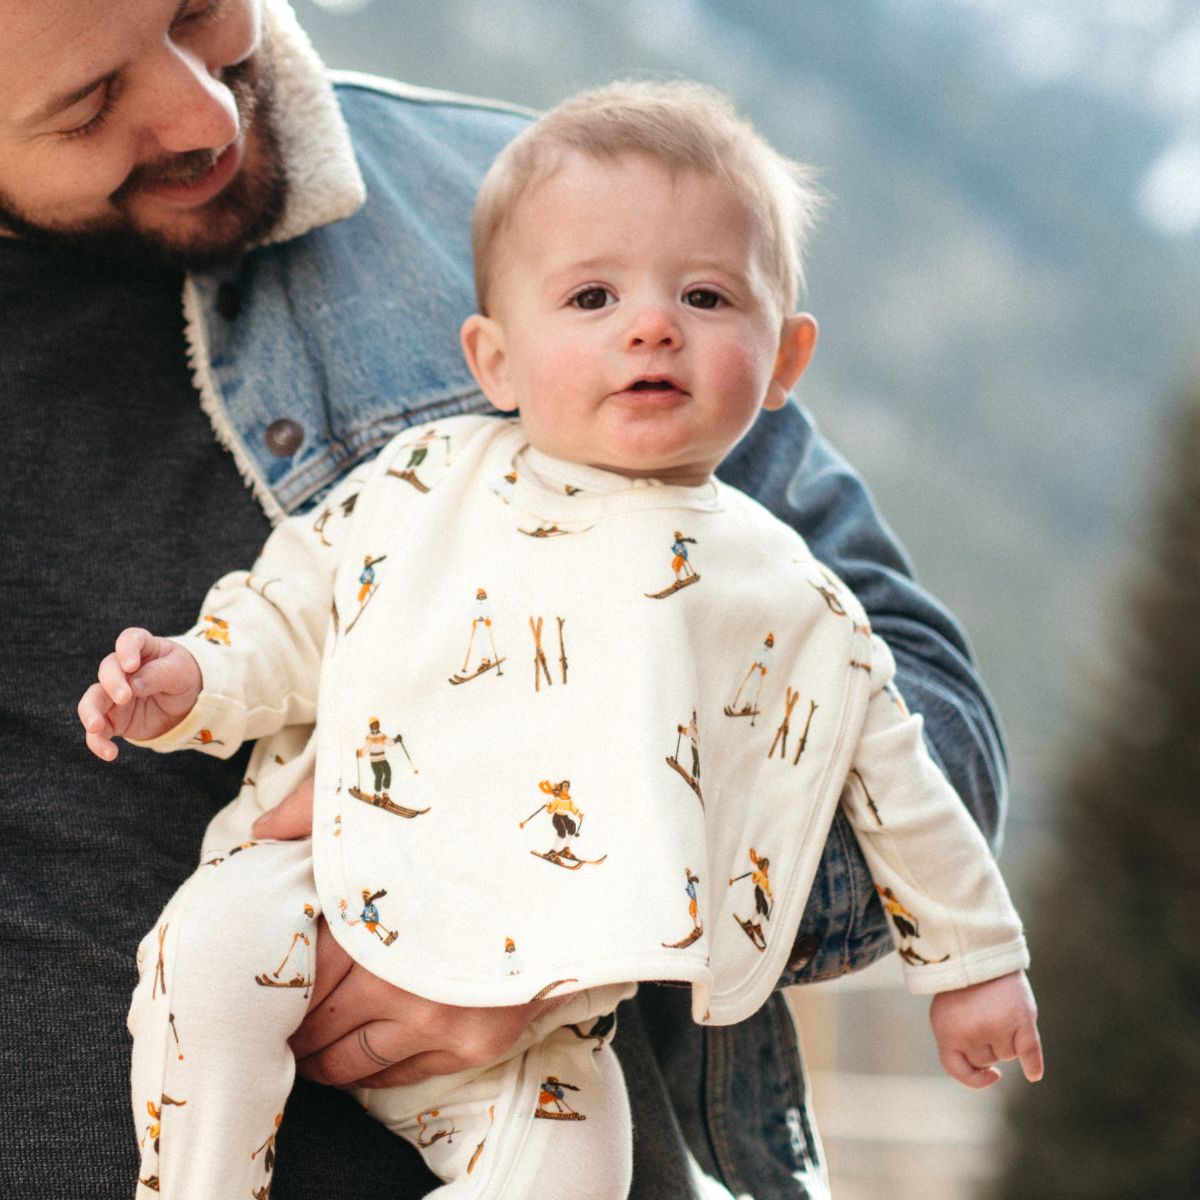 Dad in a jean jacket holding a baby outside wearing the Vintage Natural Ski Organic Cotton Traditional Bib by Milkbarn Kids